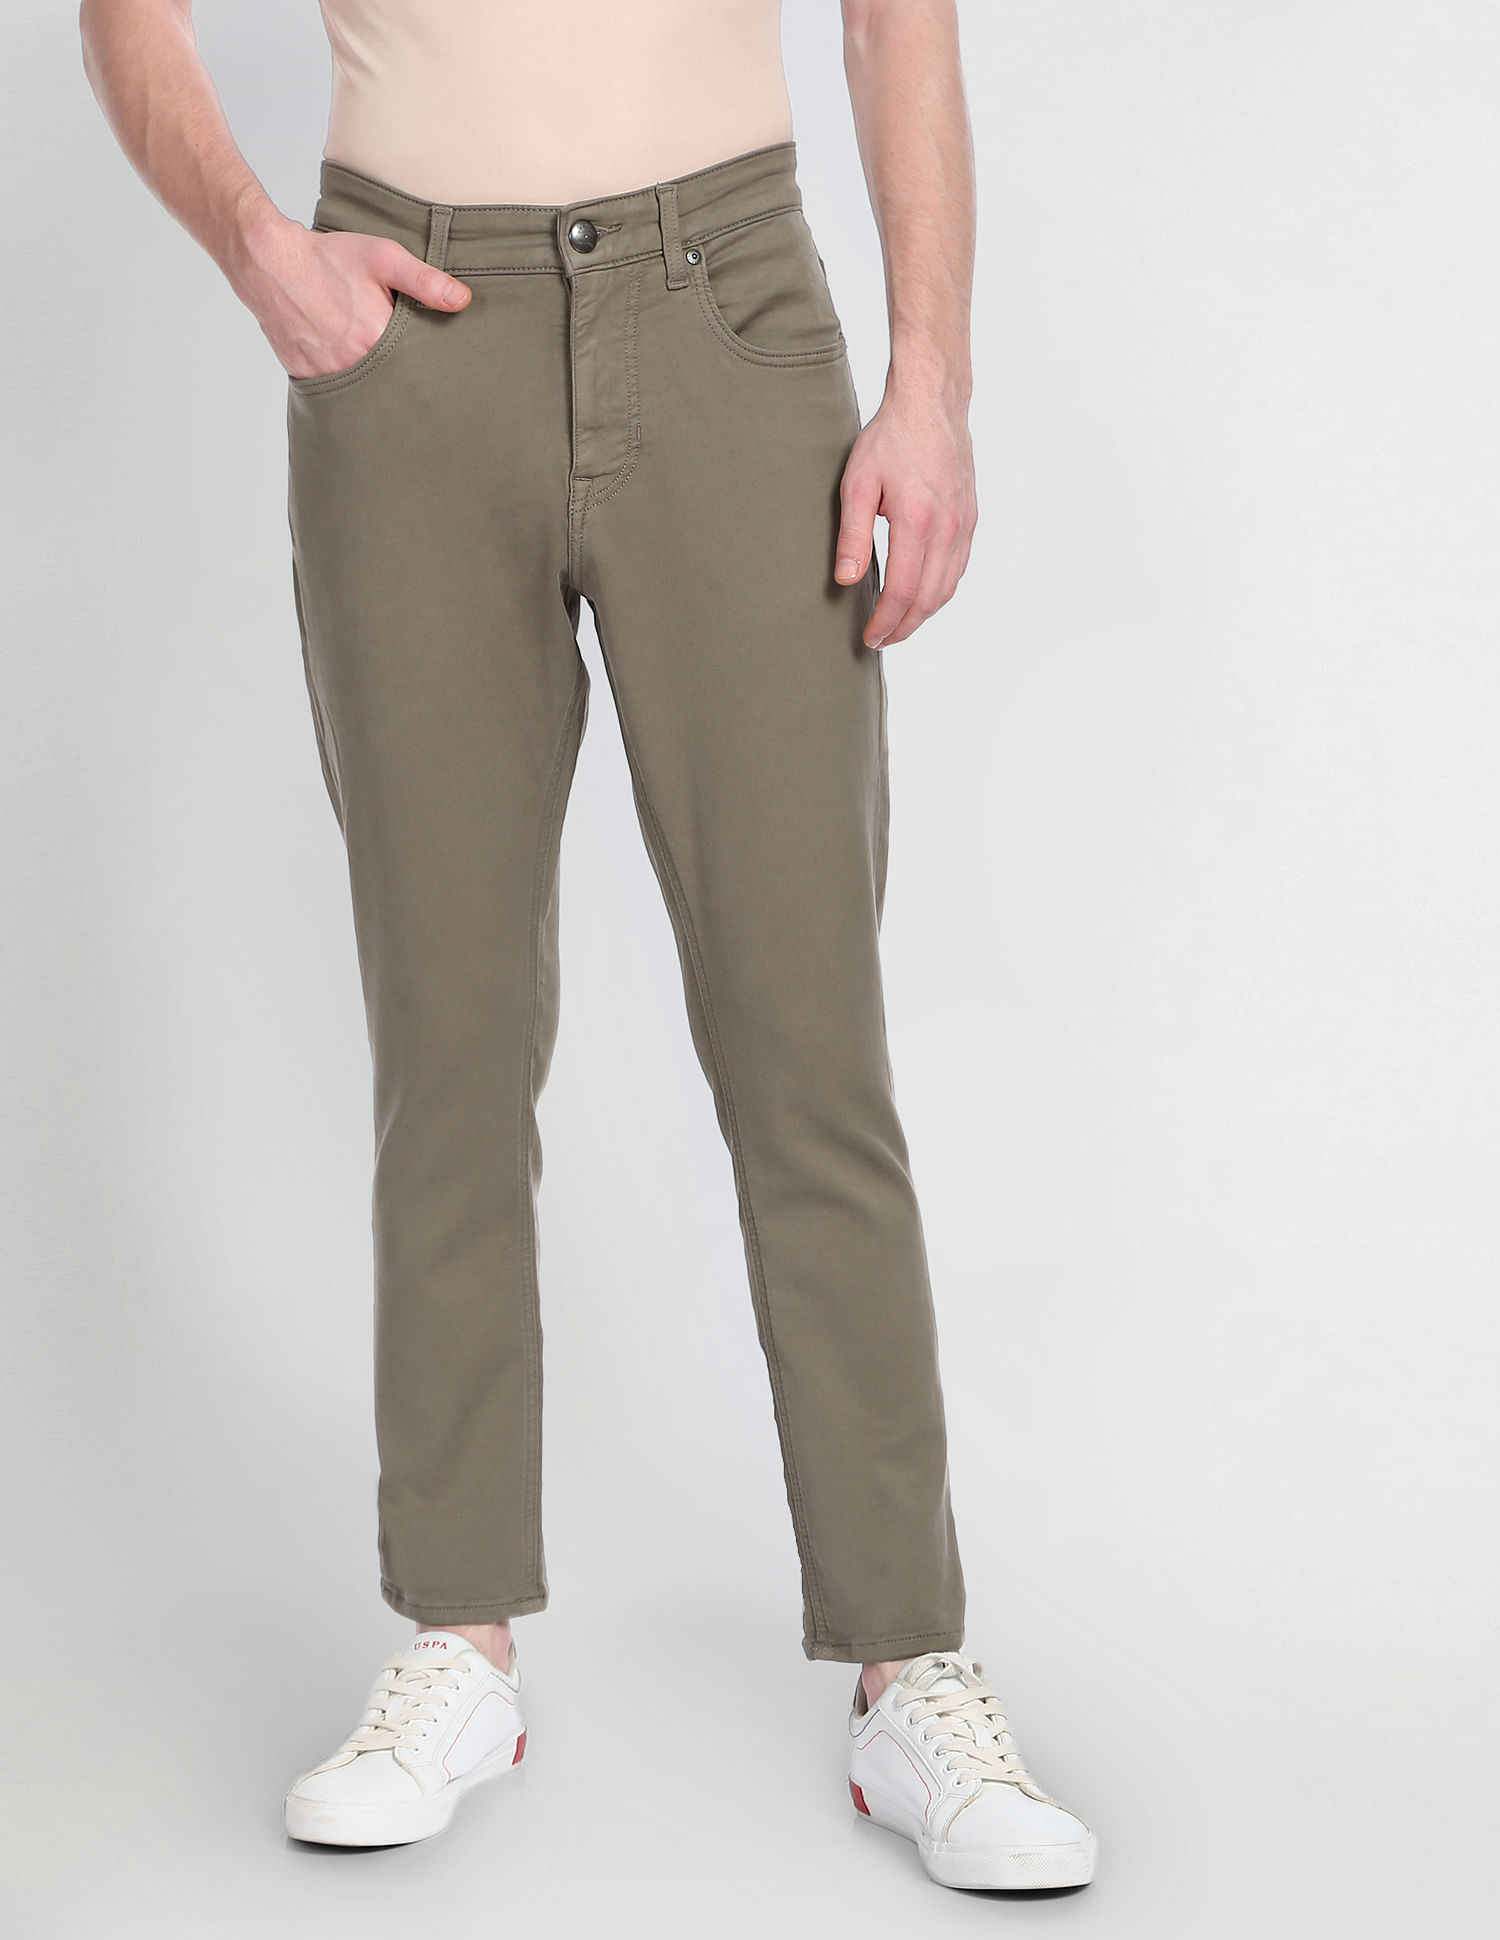 Buy MIXT by Nykaa Fashion Olive Green High Waist Wide Leg Jeans Online